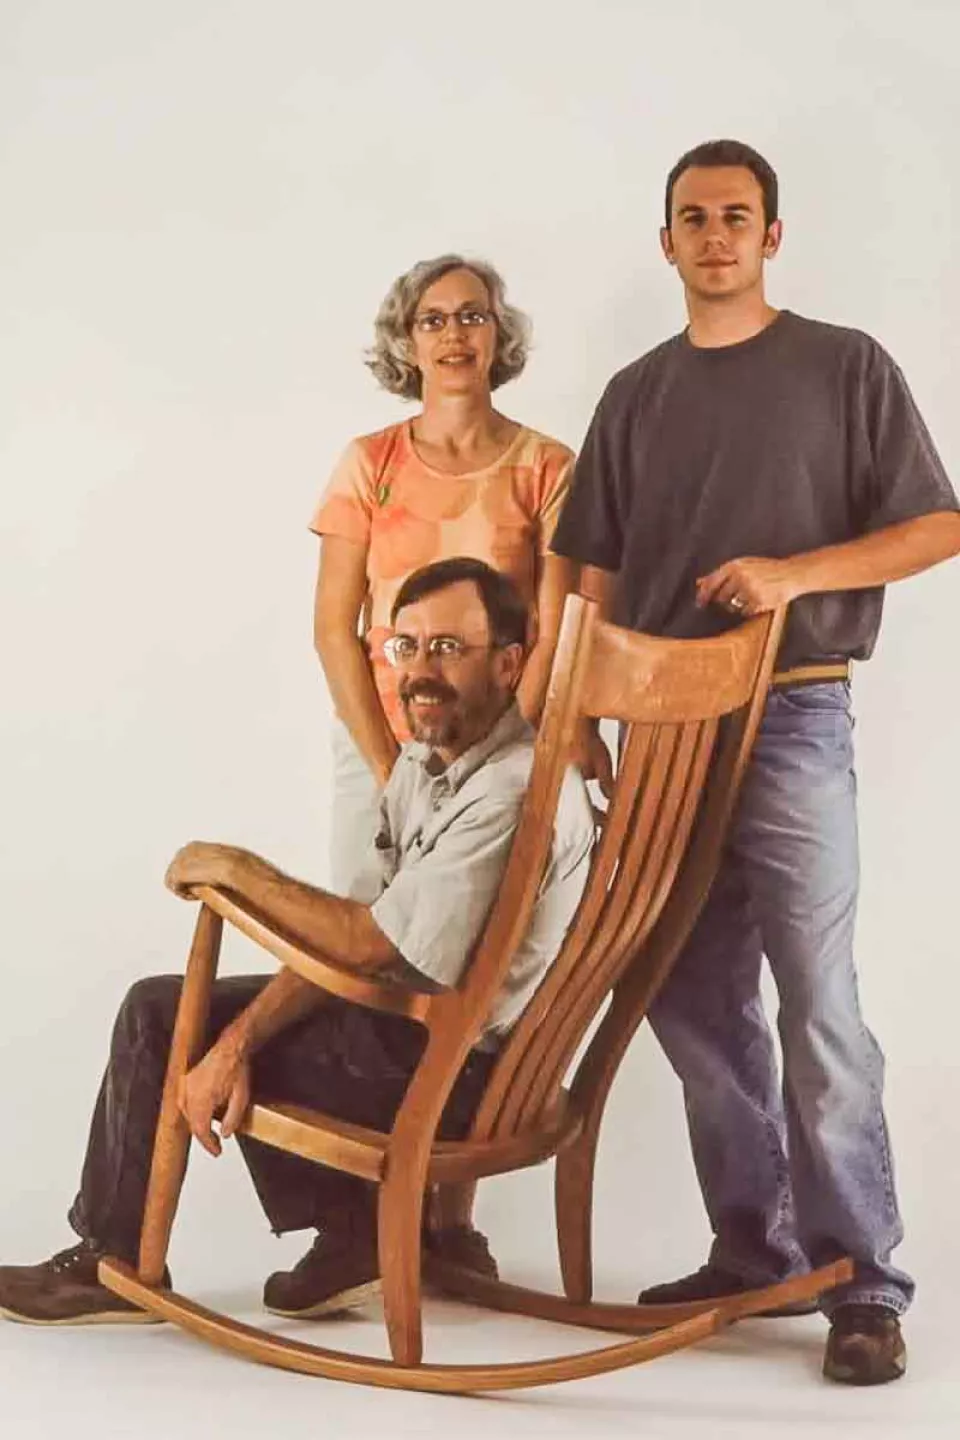 Austin, Gary, and Leslie and rocking chair